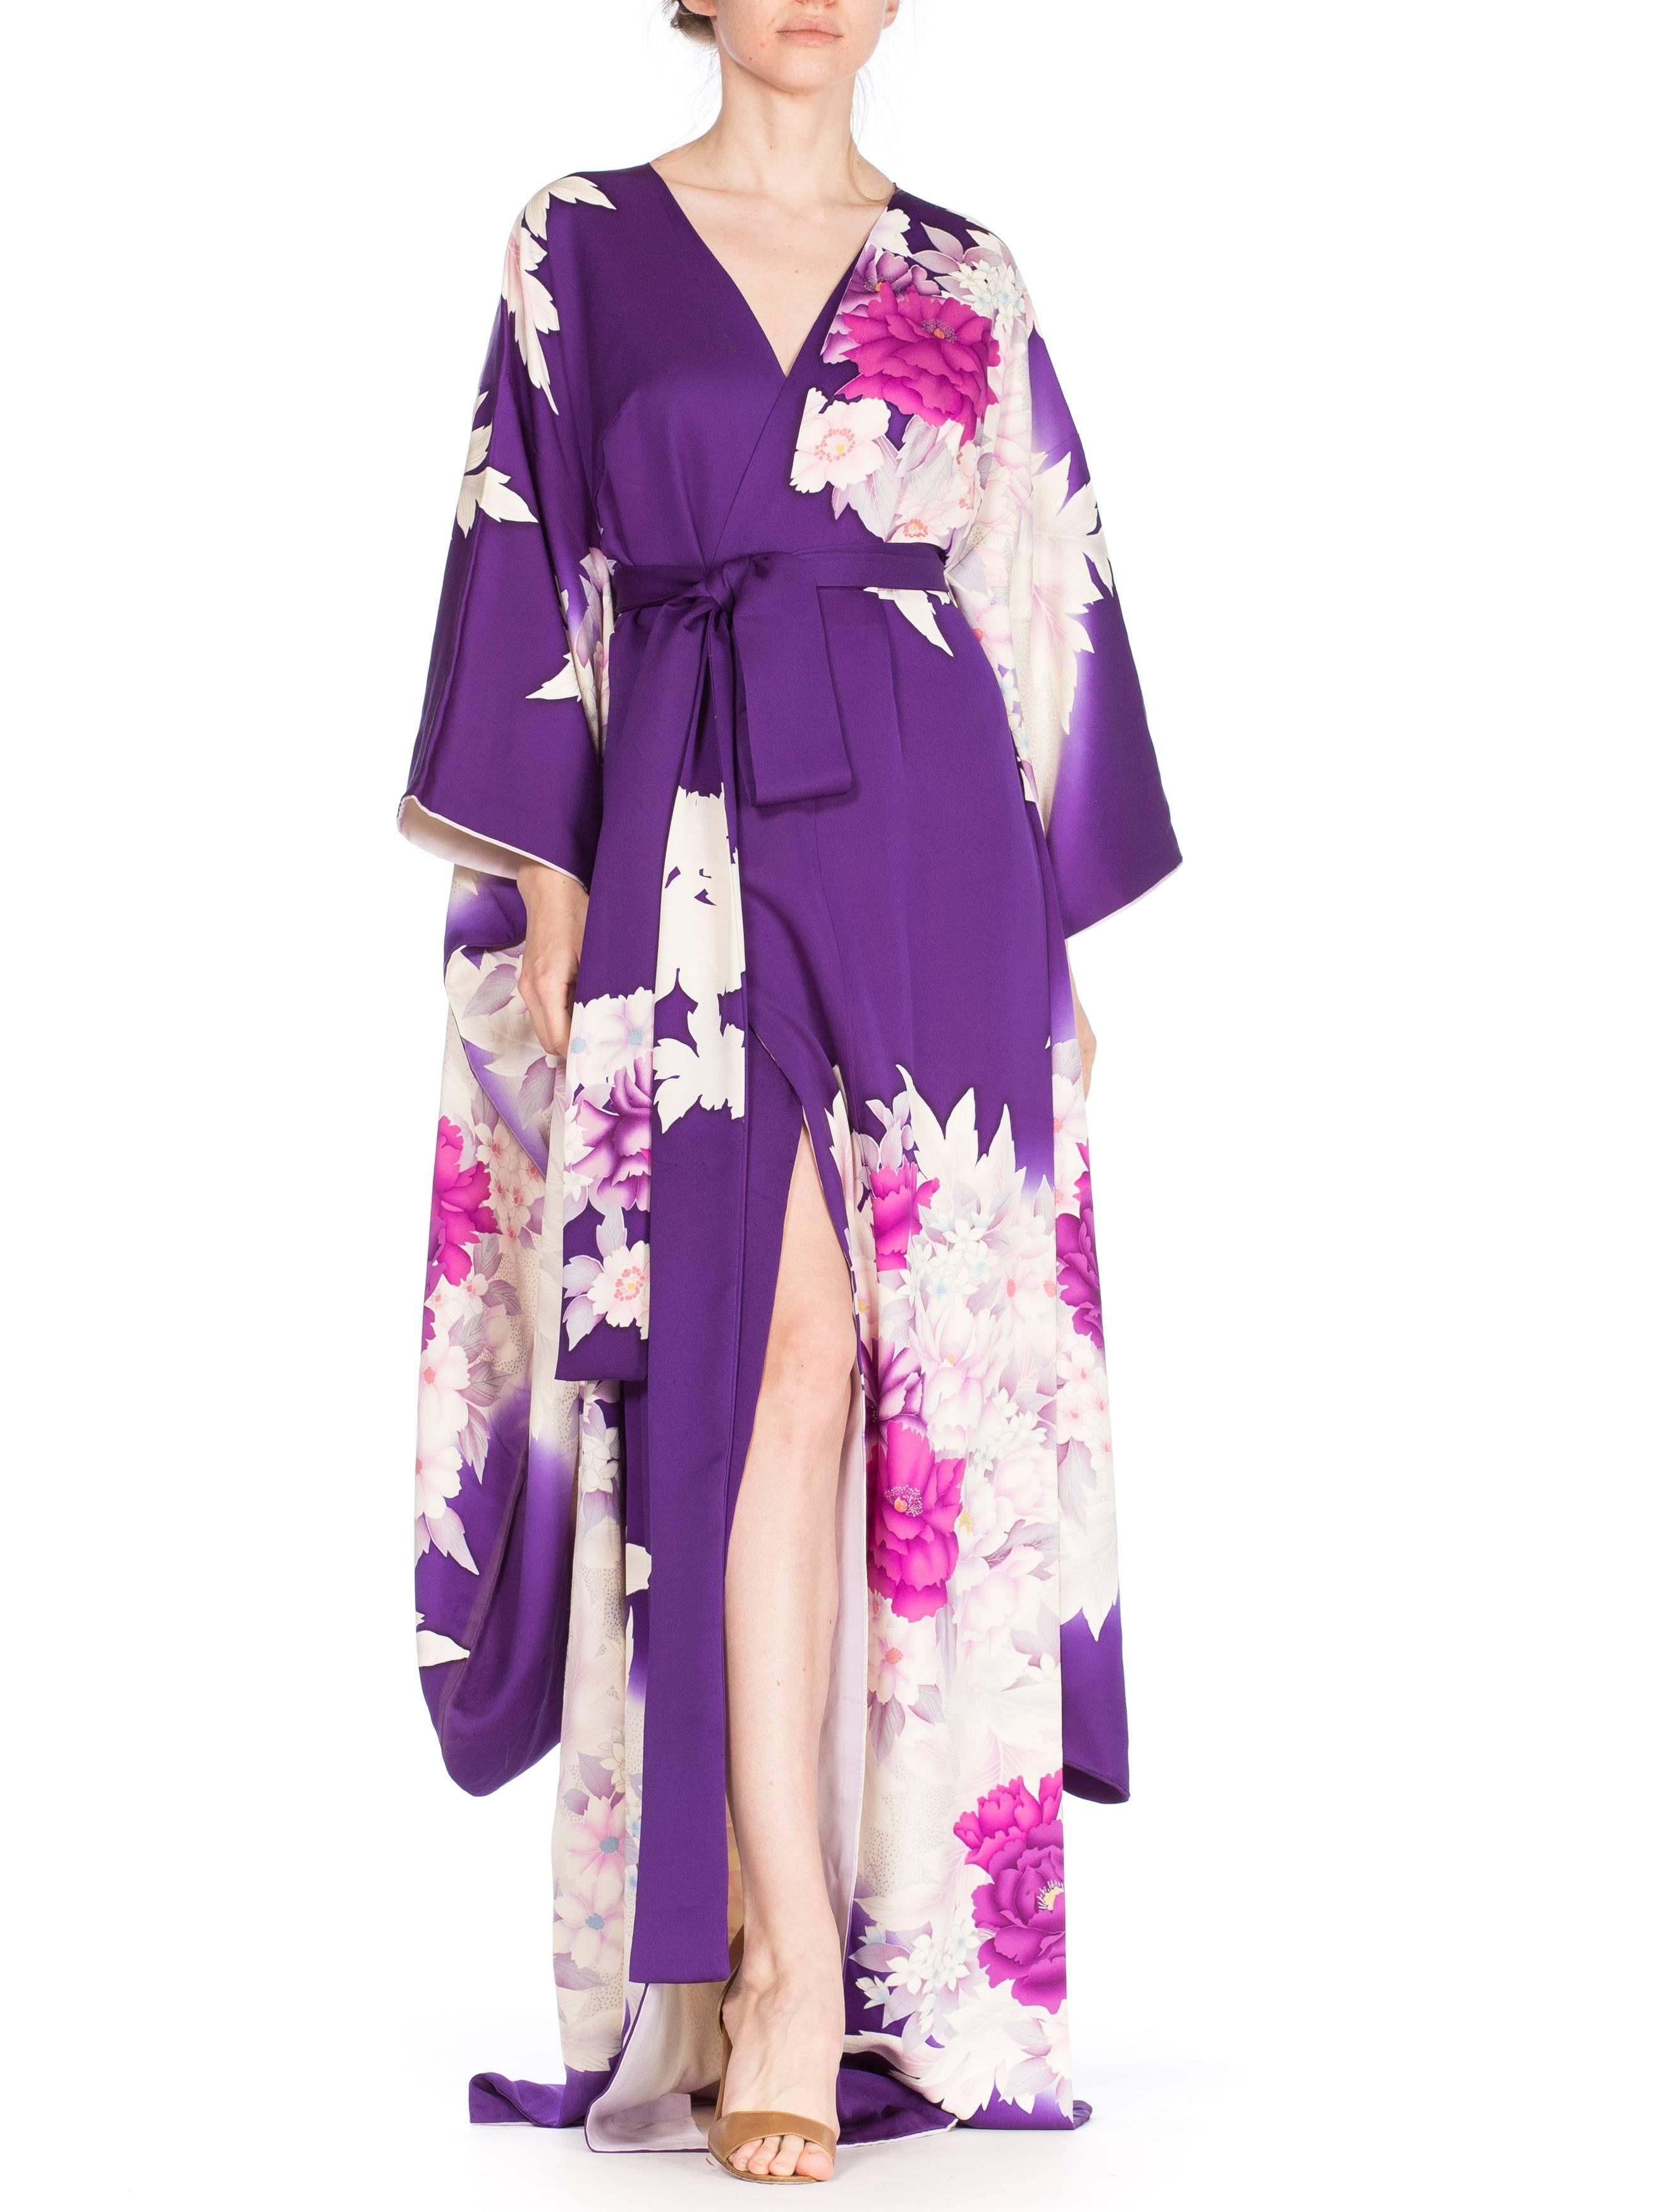 This kimono has been altered to be wearable as a dress. The front fits like a wrap dress with some darts in the front to give it a streamlined fit. There is a matching sash with a fitted elastic waistband inside the back of the kimono which keeps